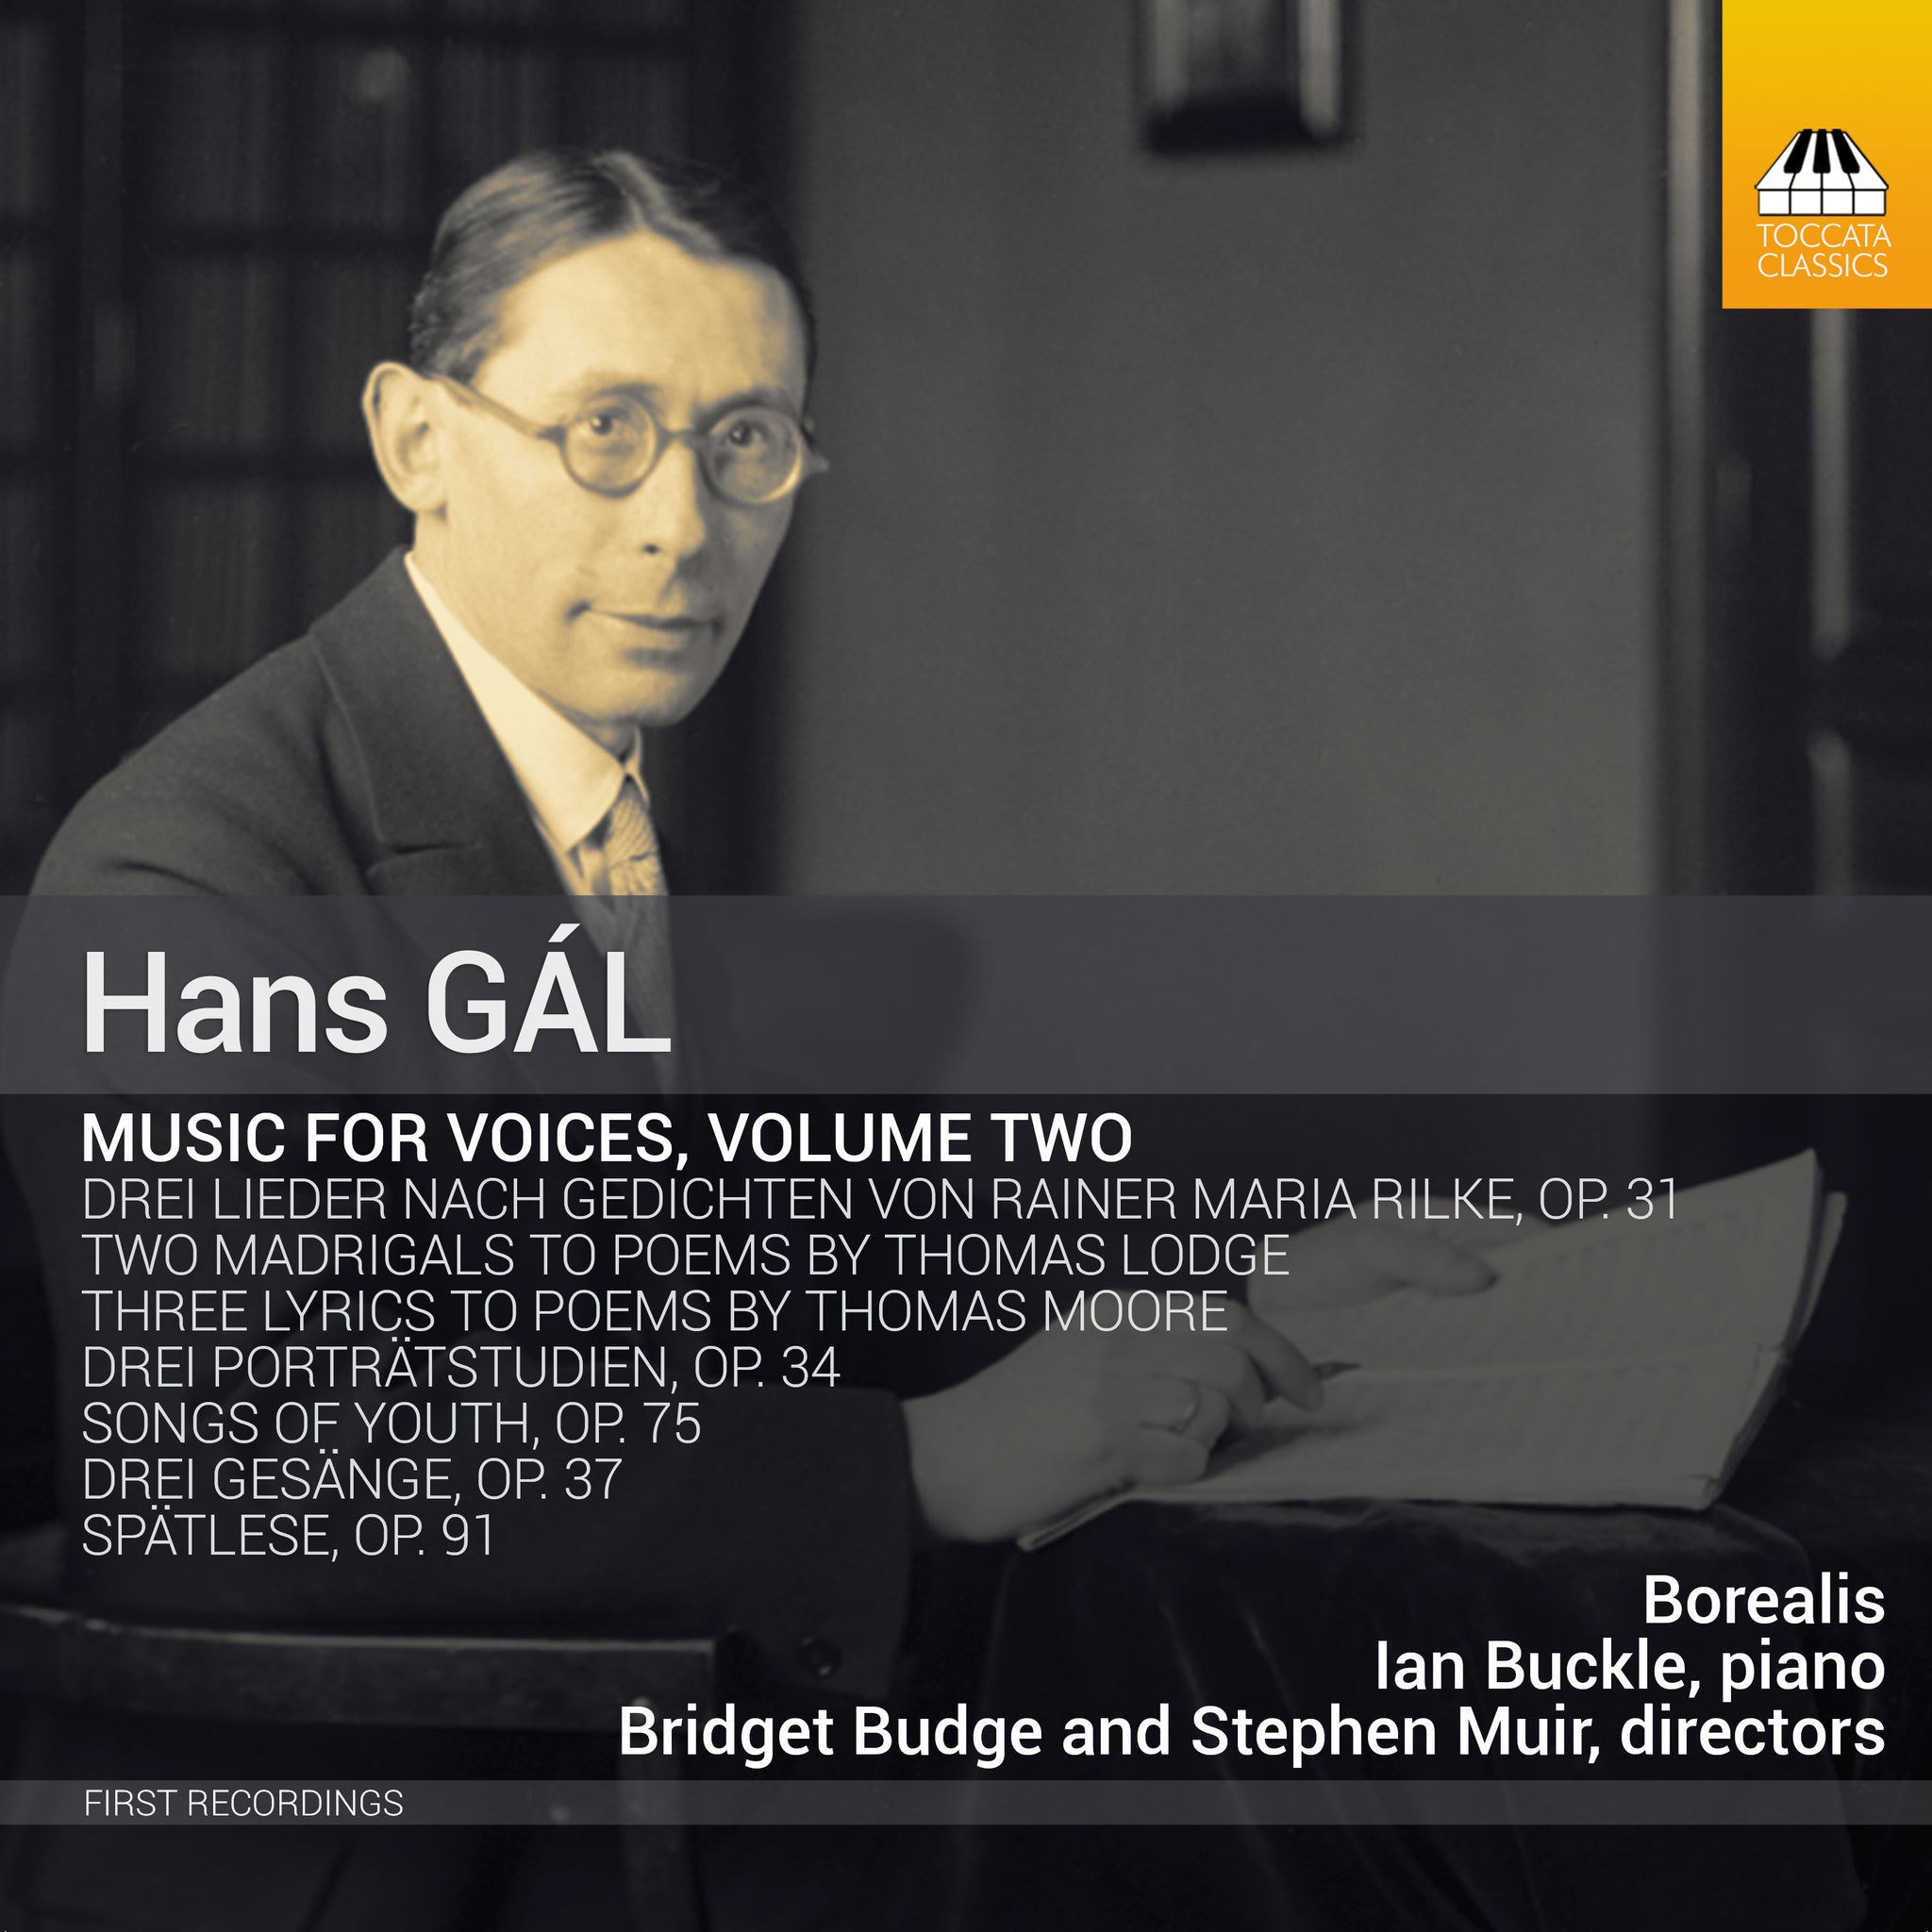 Gal: Music for Voices, Vol. 2 / Borealis